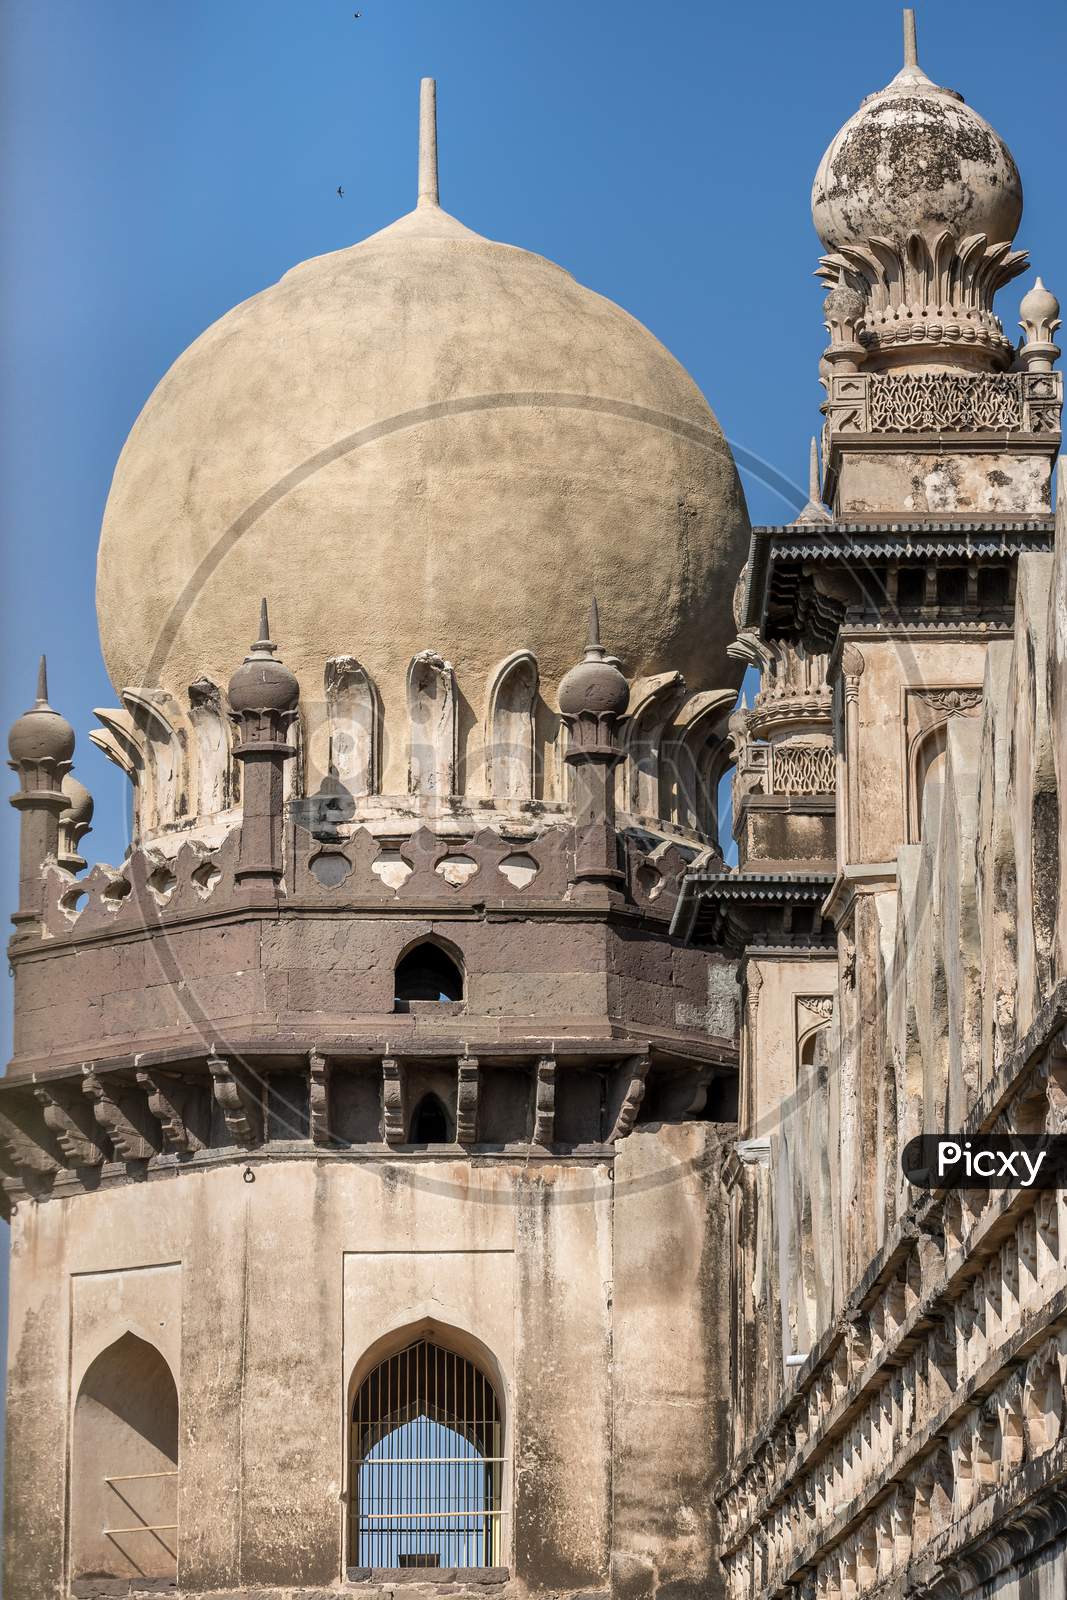 Side Dome Of Heritage Structure Gol Ghumbaj Which Is The Mausoleum Of King Mohammed Adil Shah, Sultan Of Bijapur.